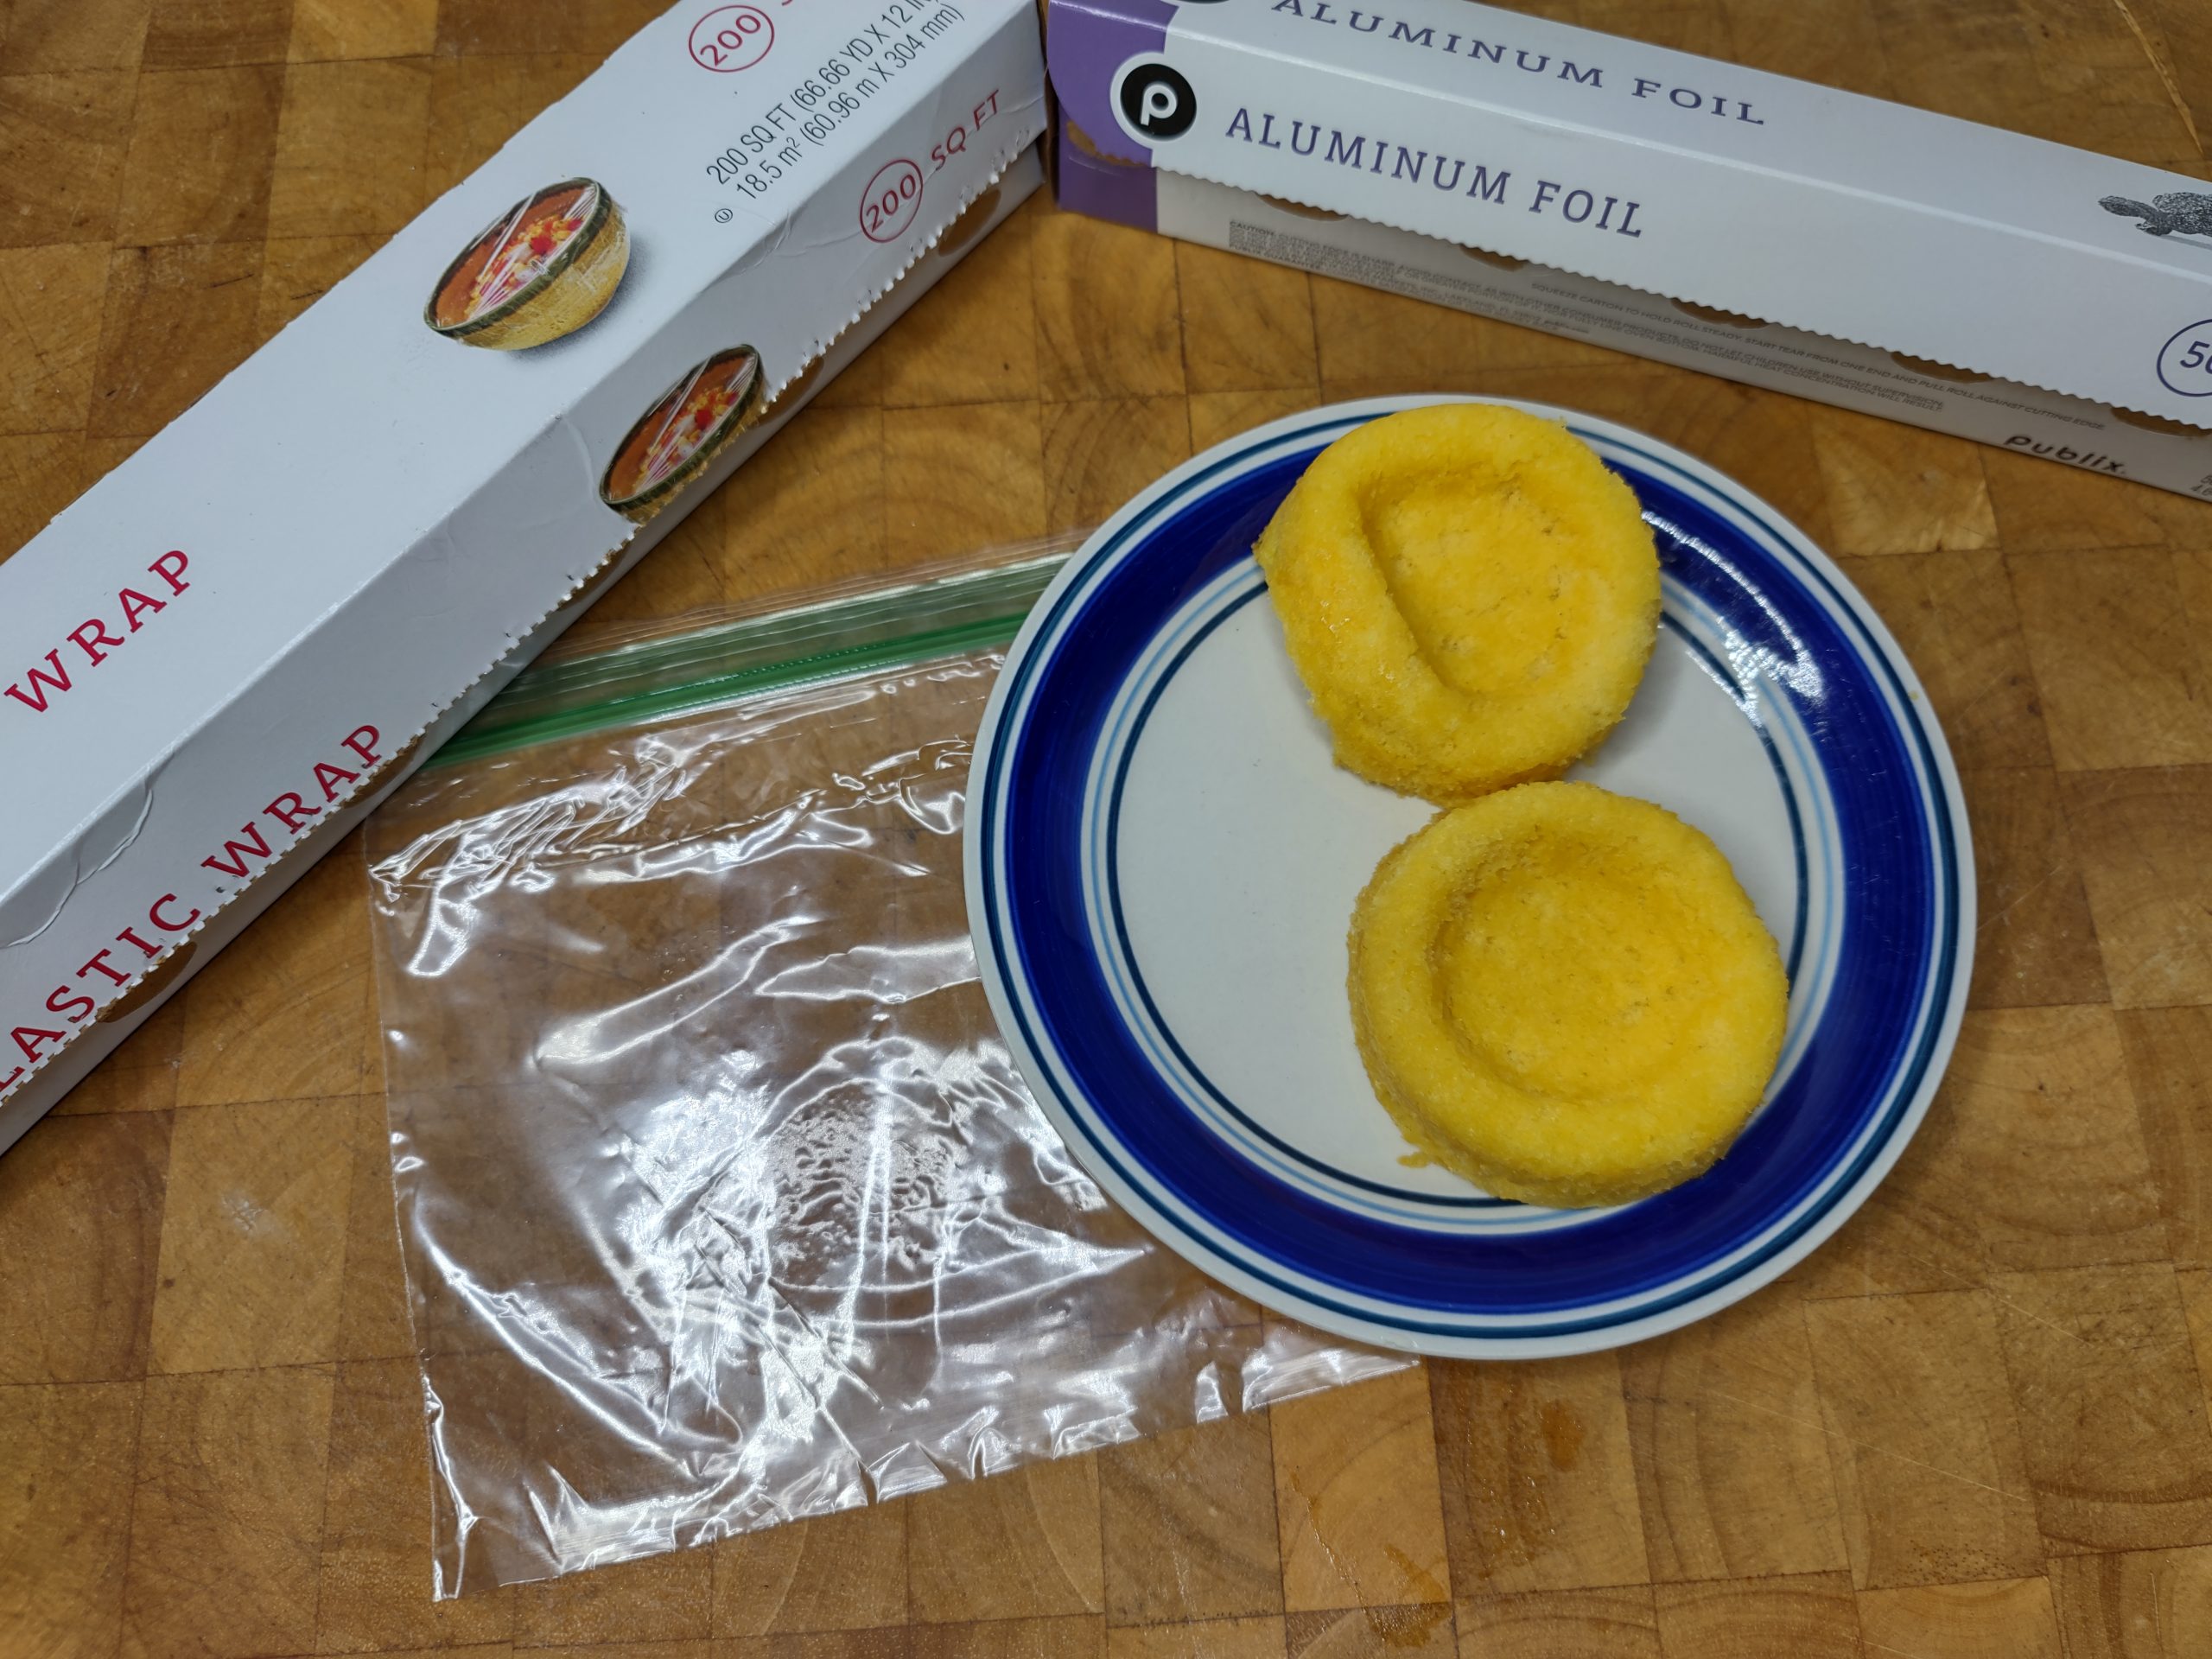 two slices of sponge cake on a plate next to an empty freezer bag, roll of plastic wrap and roll of aluminum foil